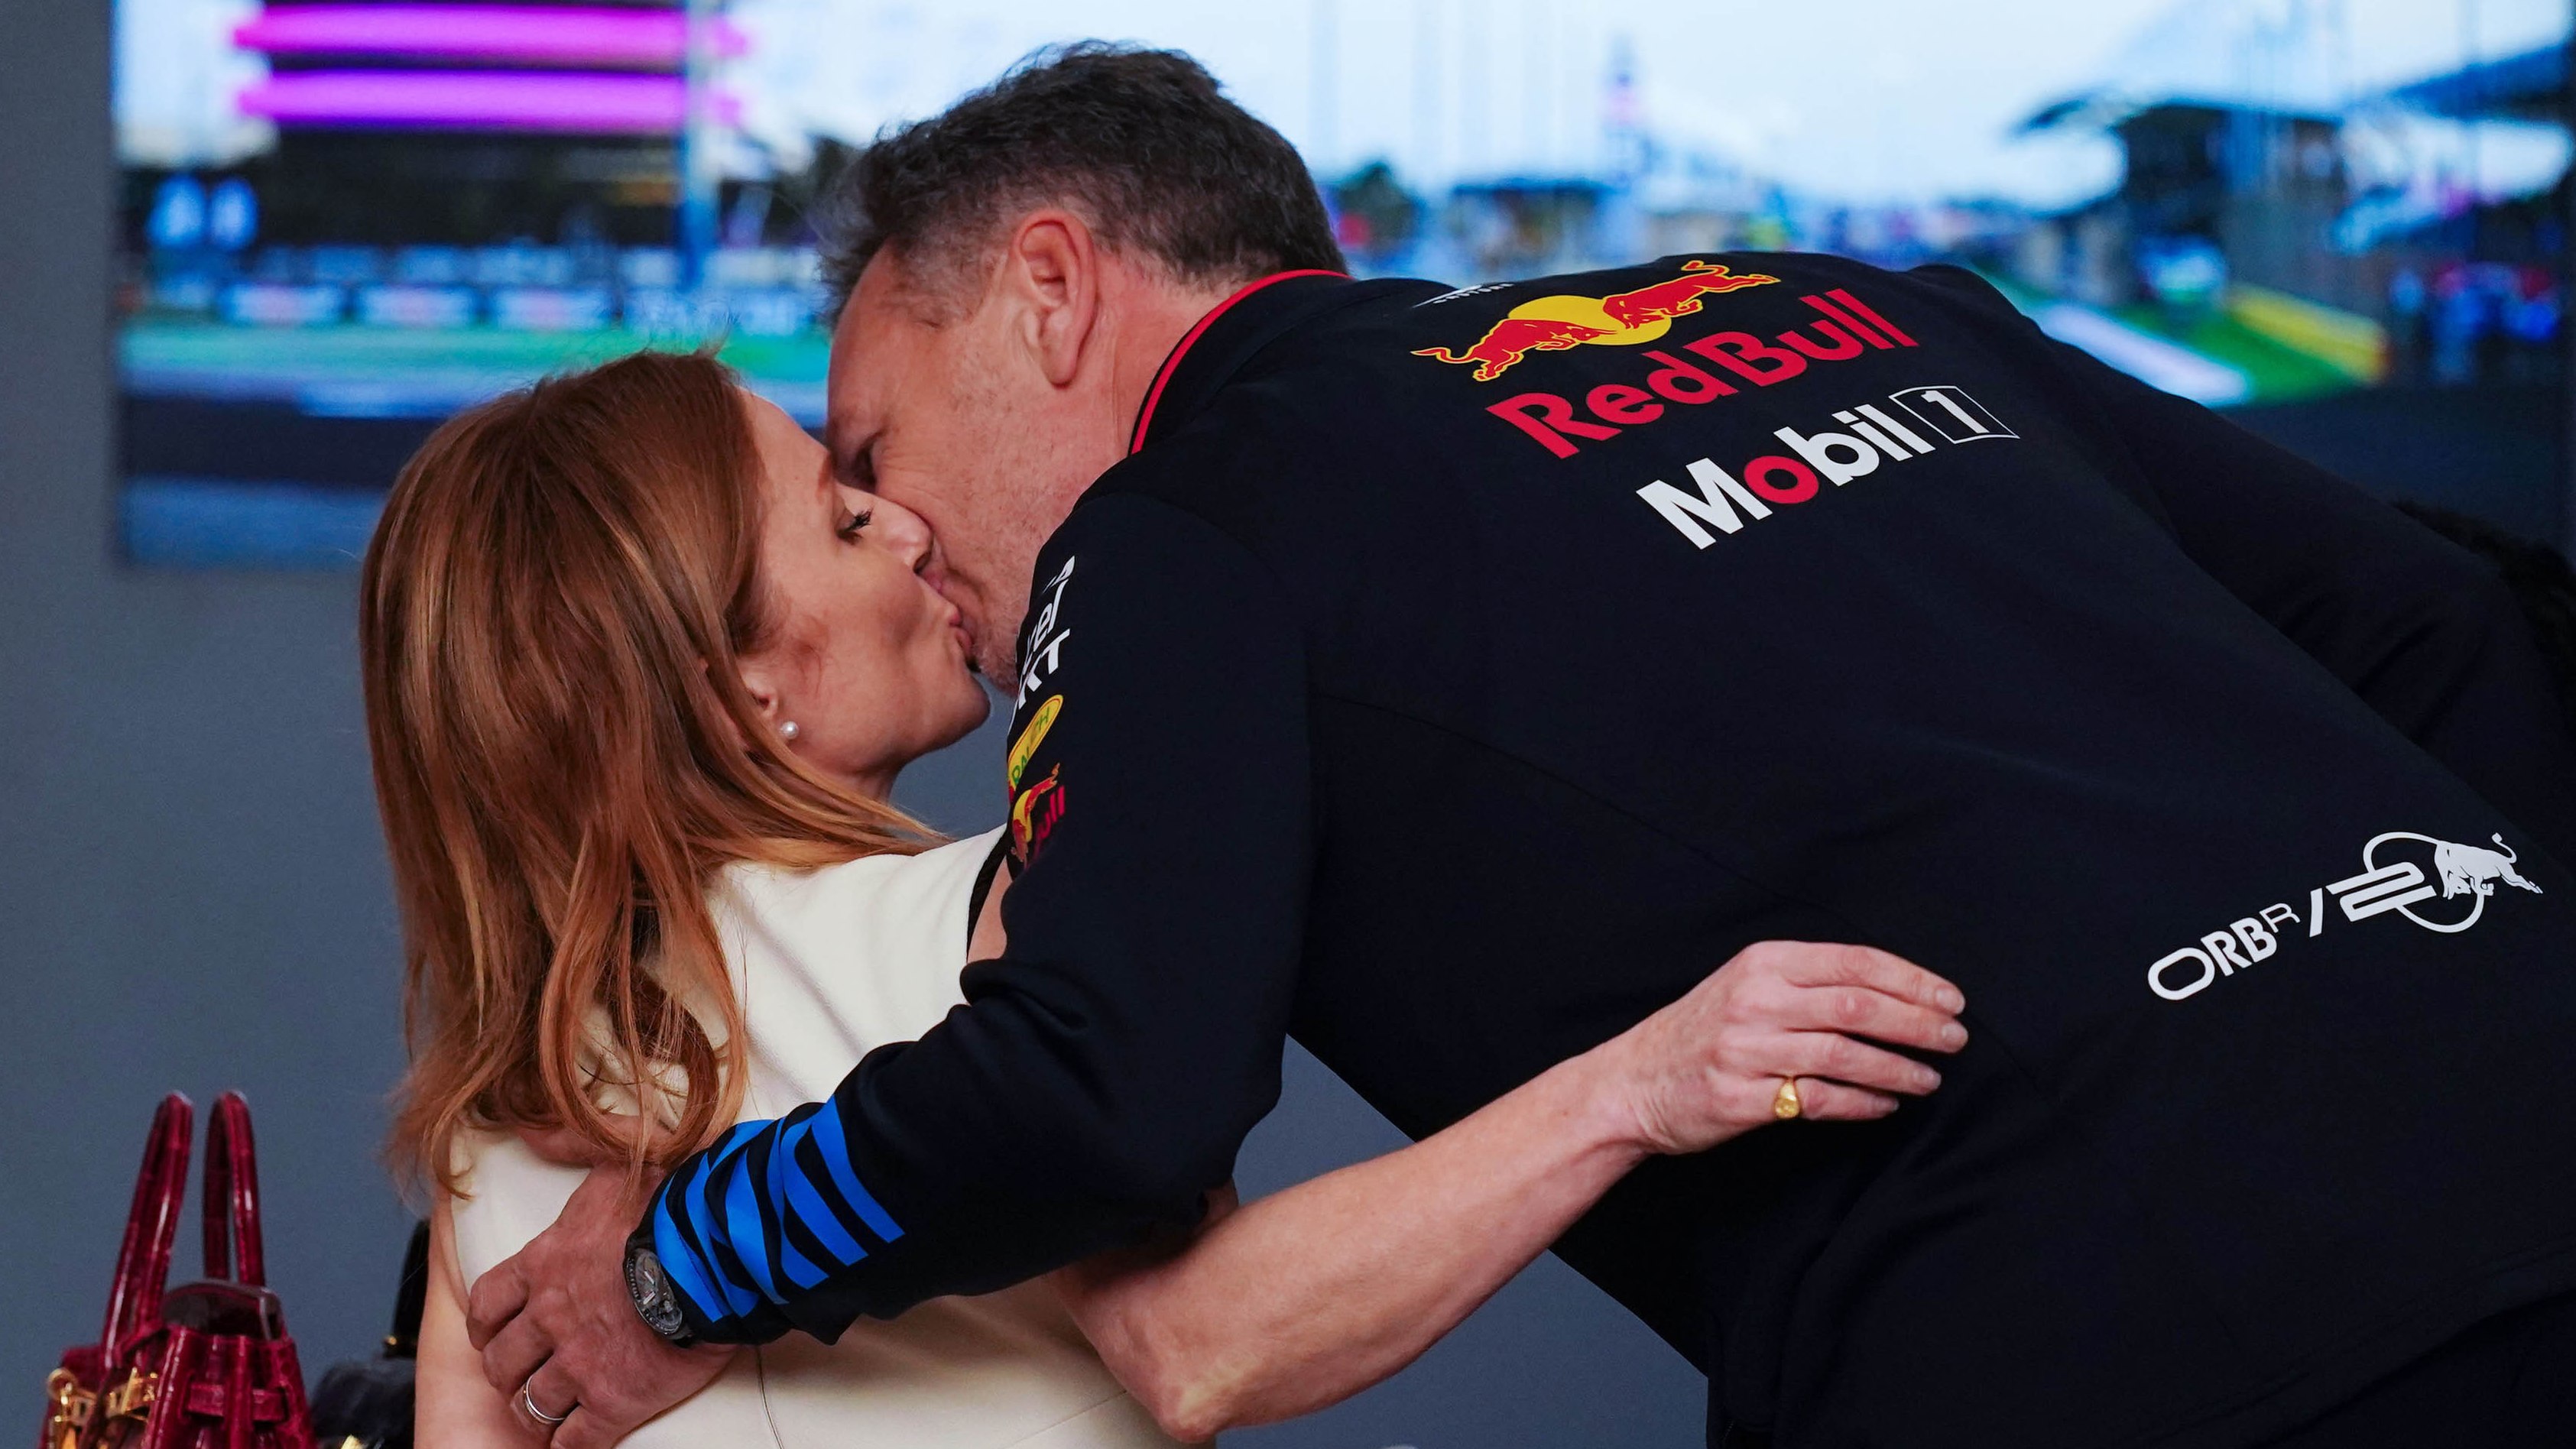 Geri Halliwell’s Stand By Your Man routine at F1 was, er, textbook